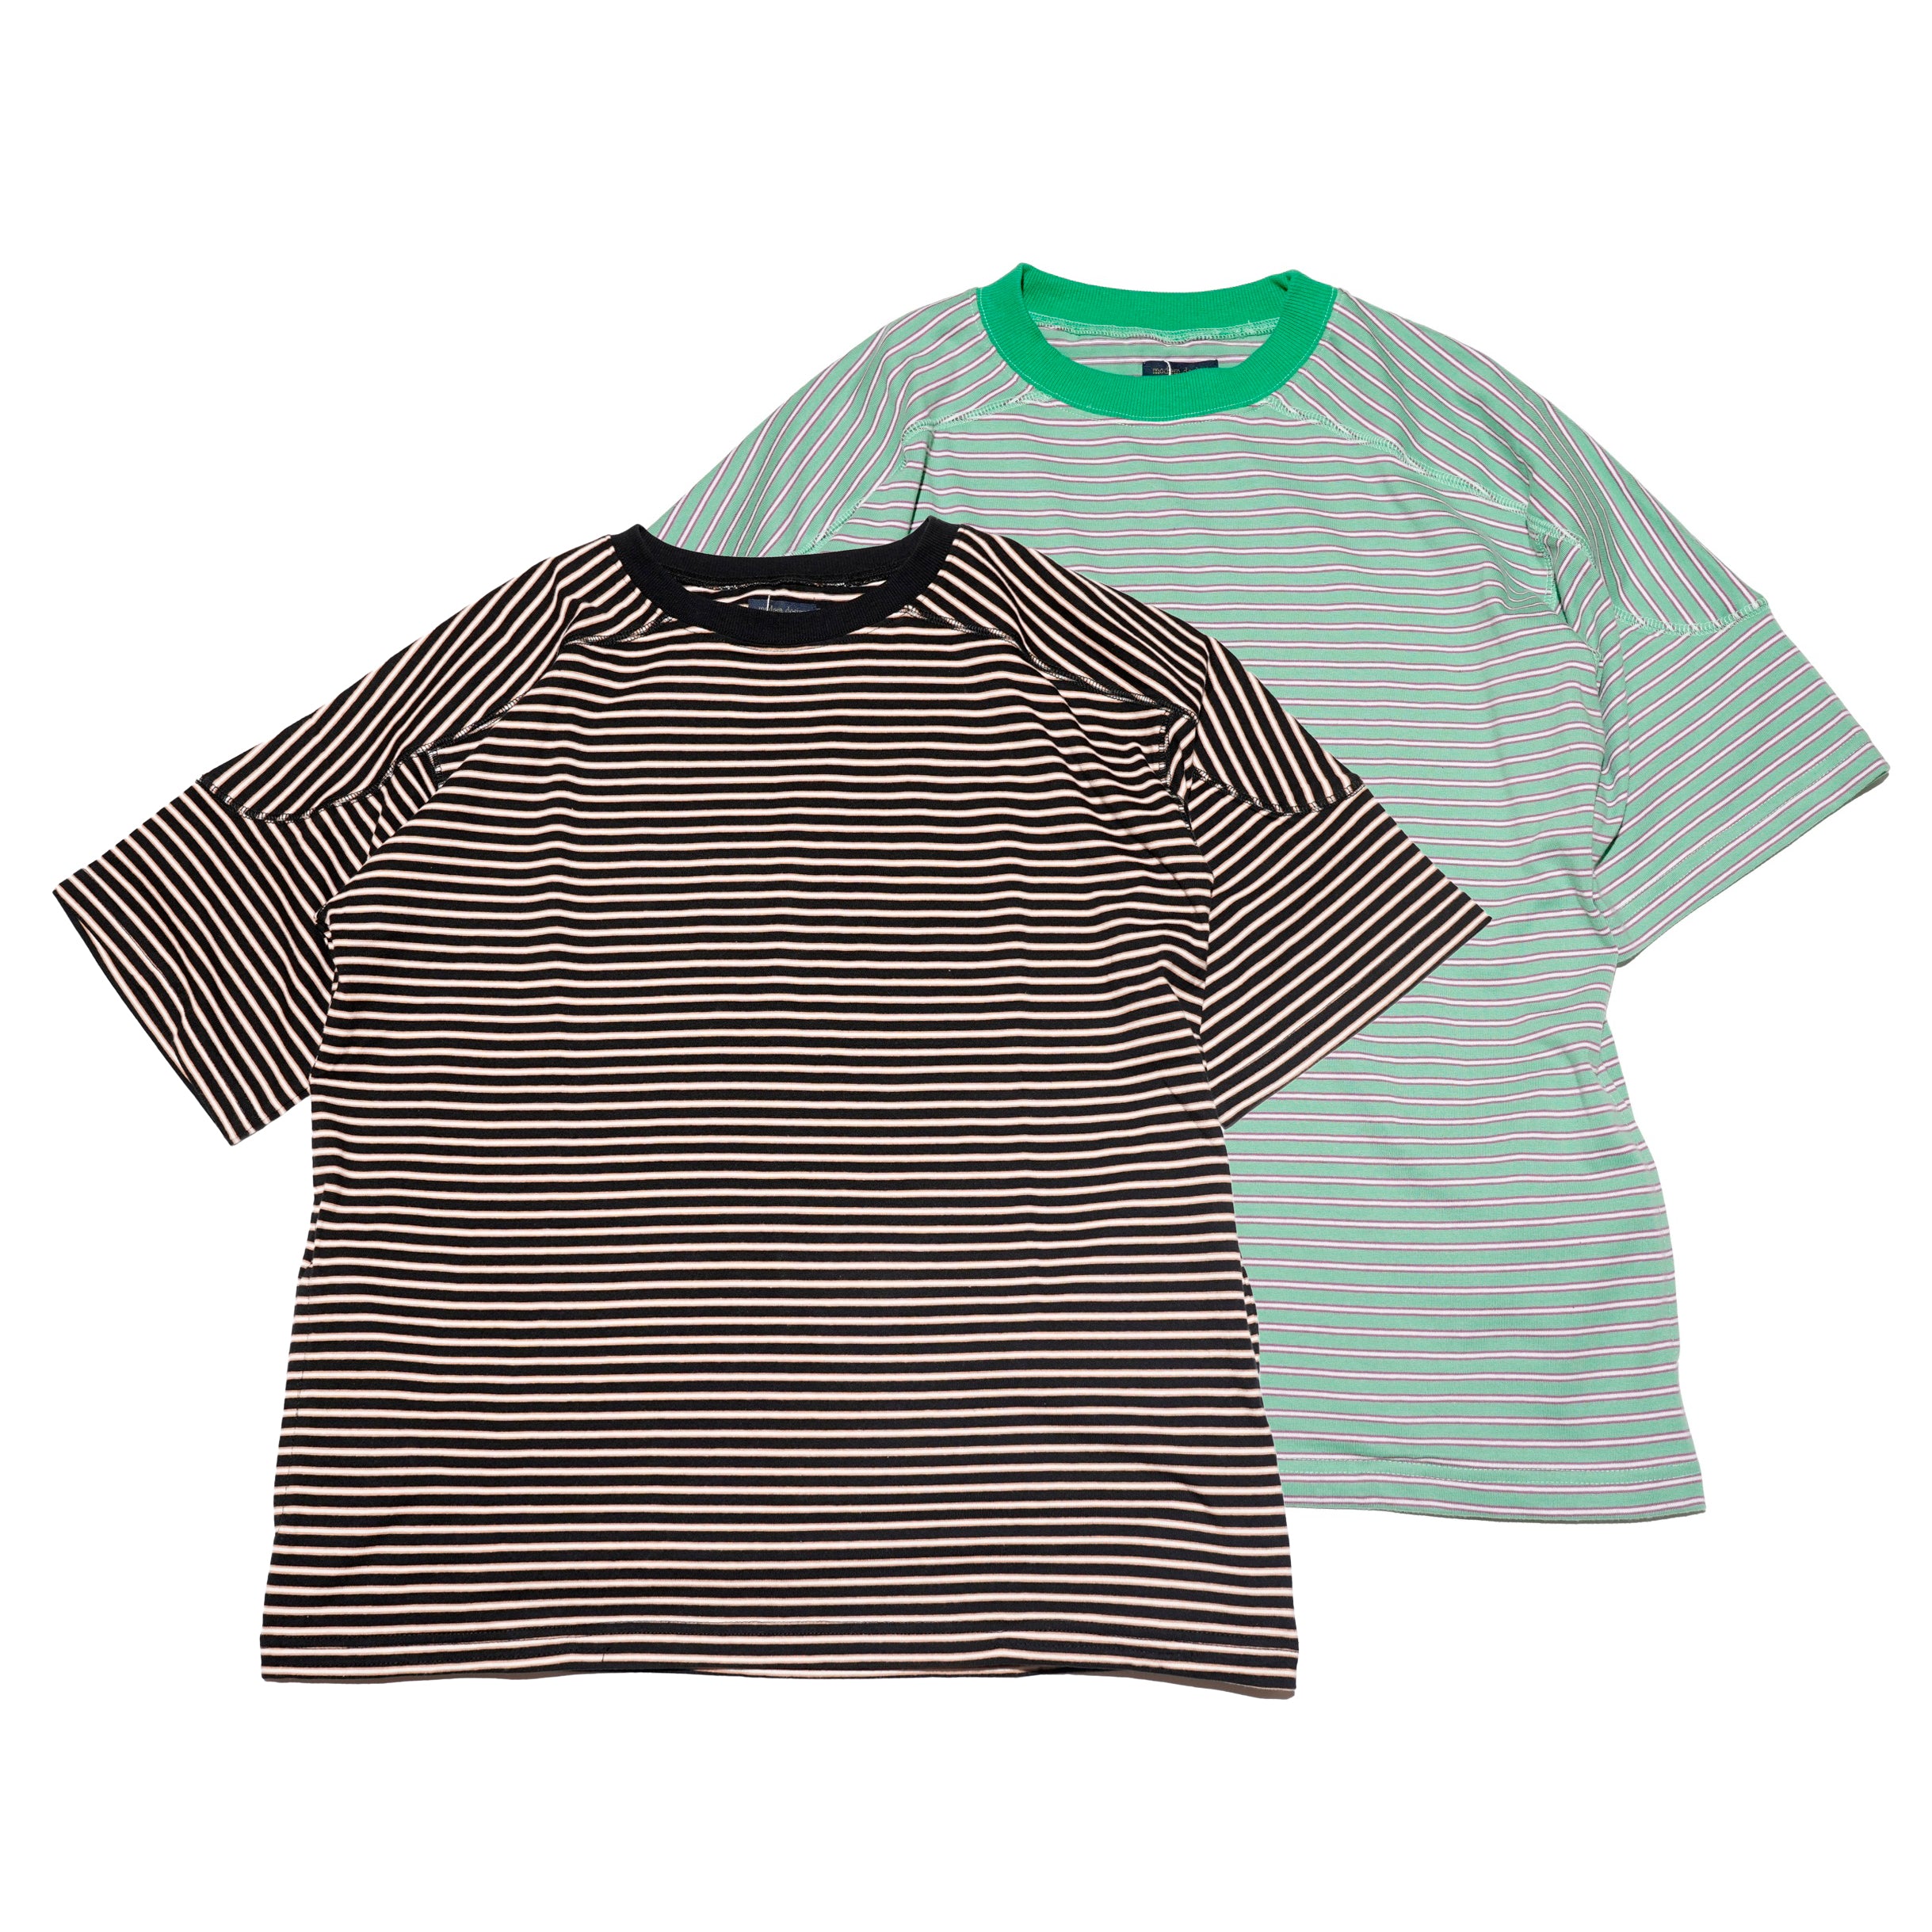 No:M-2301251 | Name:Multi Striped Cut and Sew | Color:Green/Black【MODEM DESIGN_モデムデザイン】